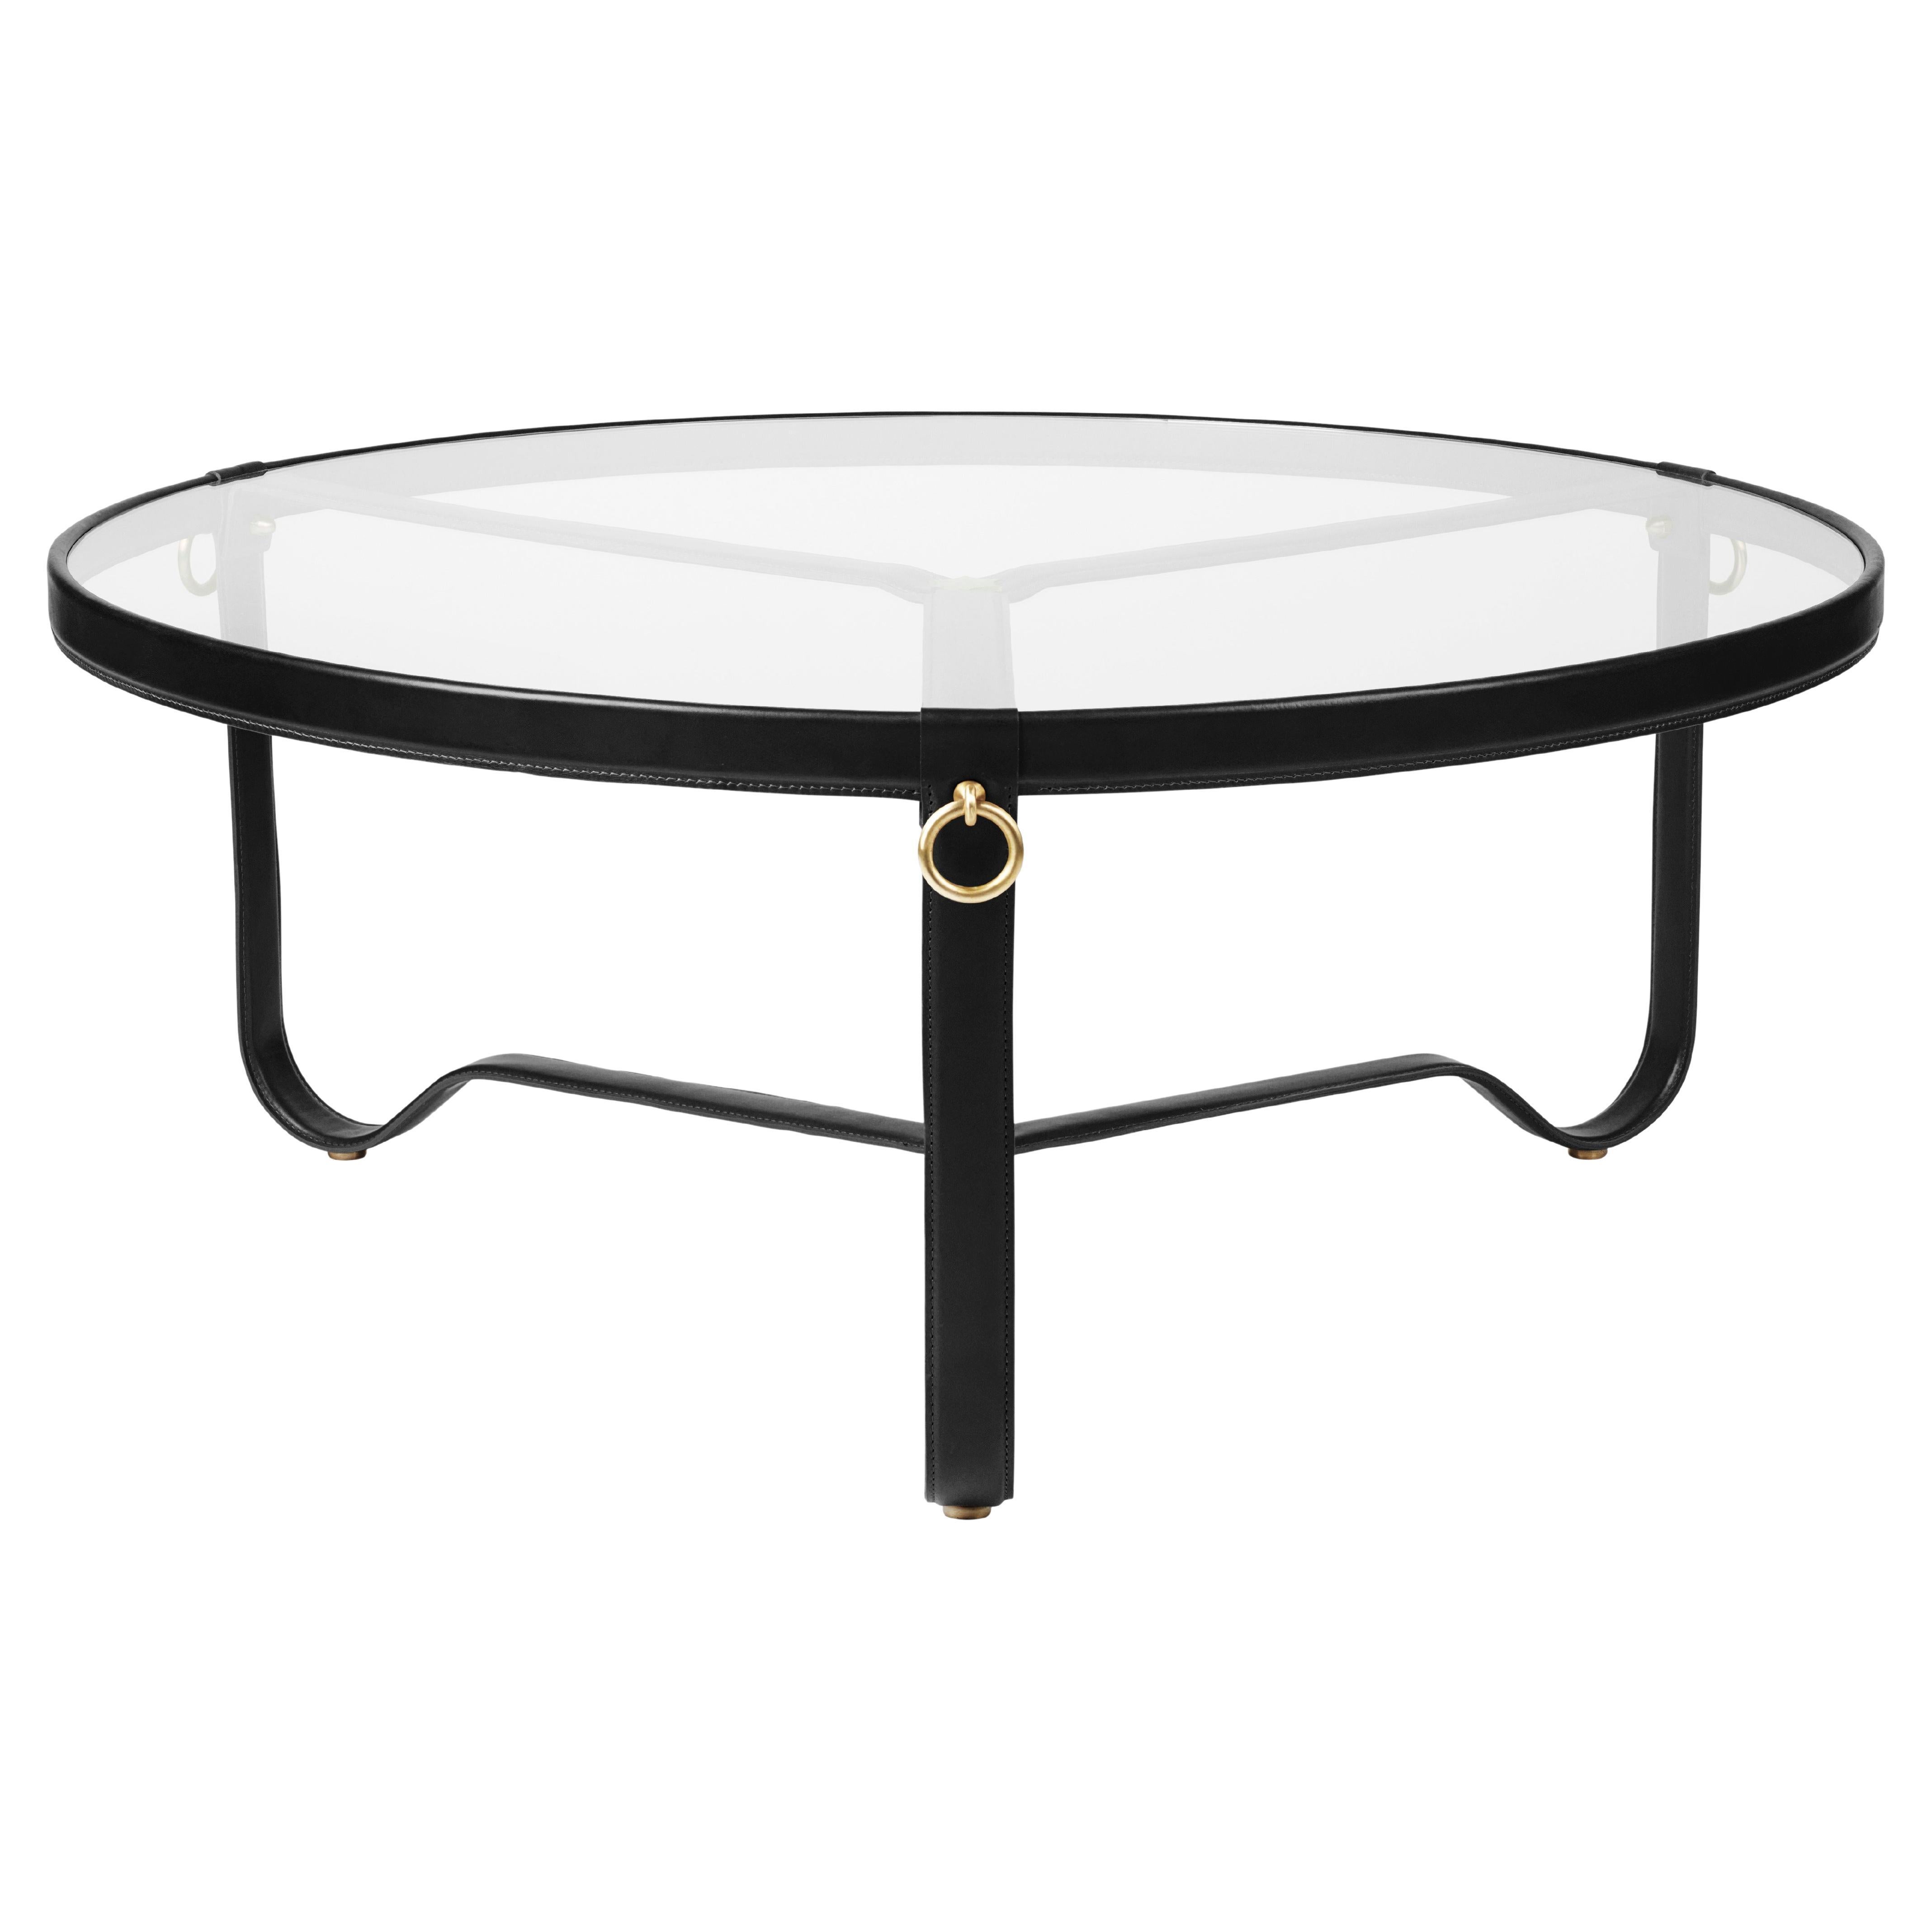 Large Jacques Adnet 'Circulaire' Glass and Black Leather Coffee Table for GUBI